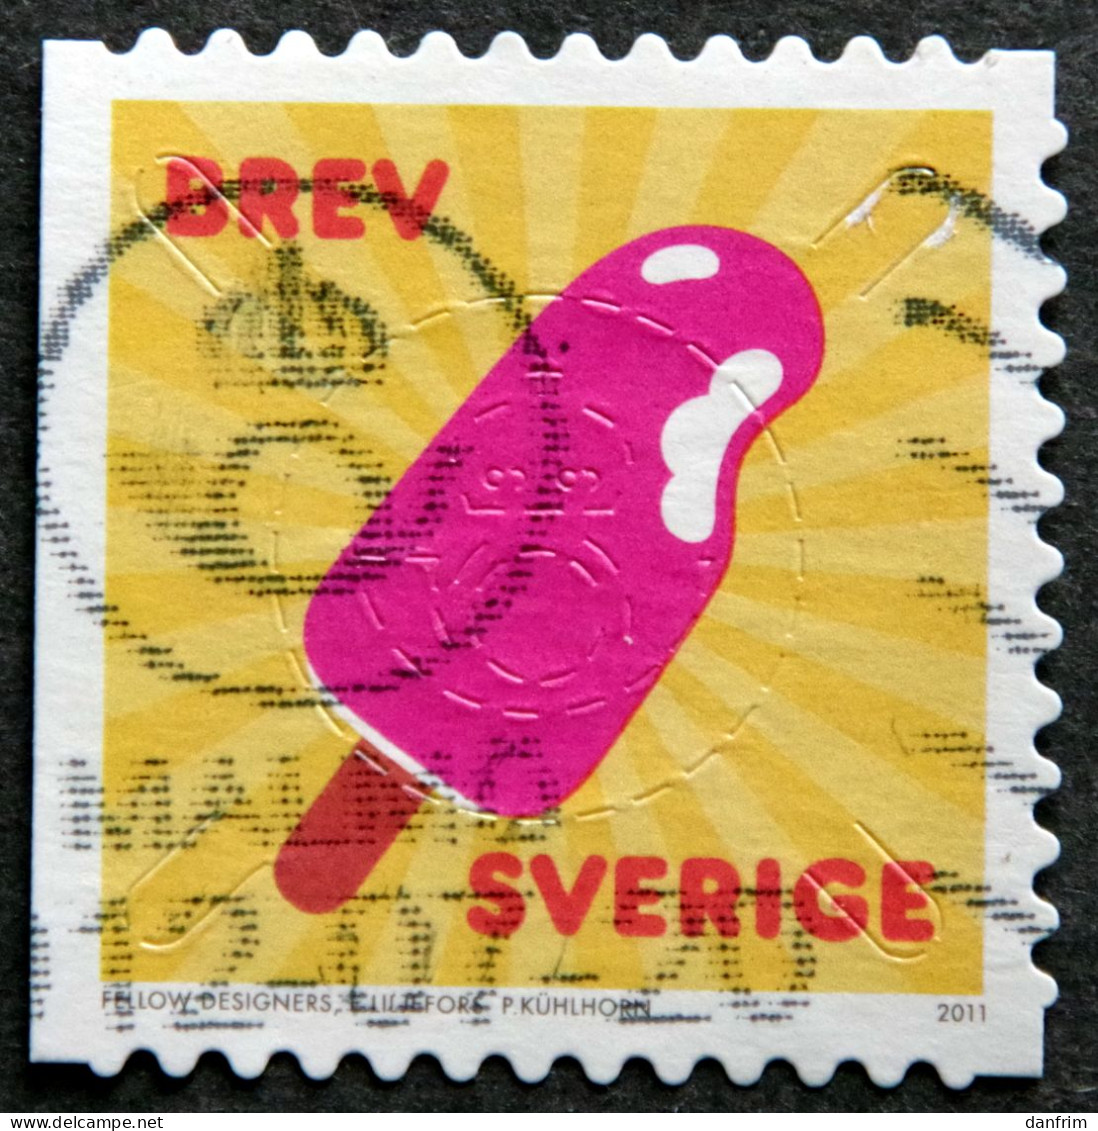 Sweden  2011 ICE CREAMS  MiNr.2822  (0)  ( Lot  I 125  ) - Used Stamps